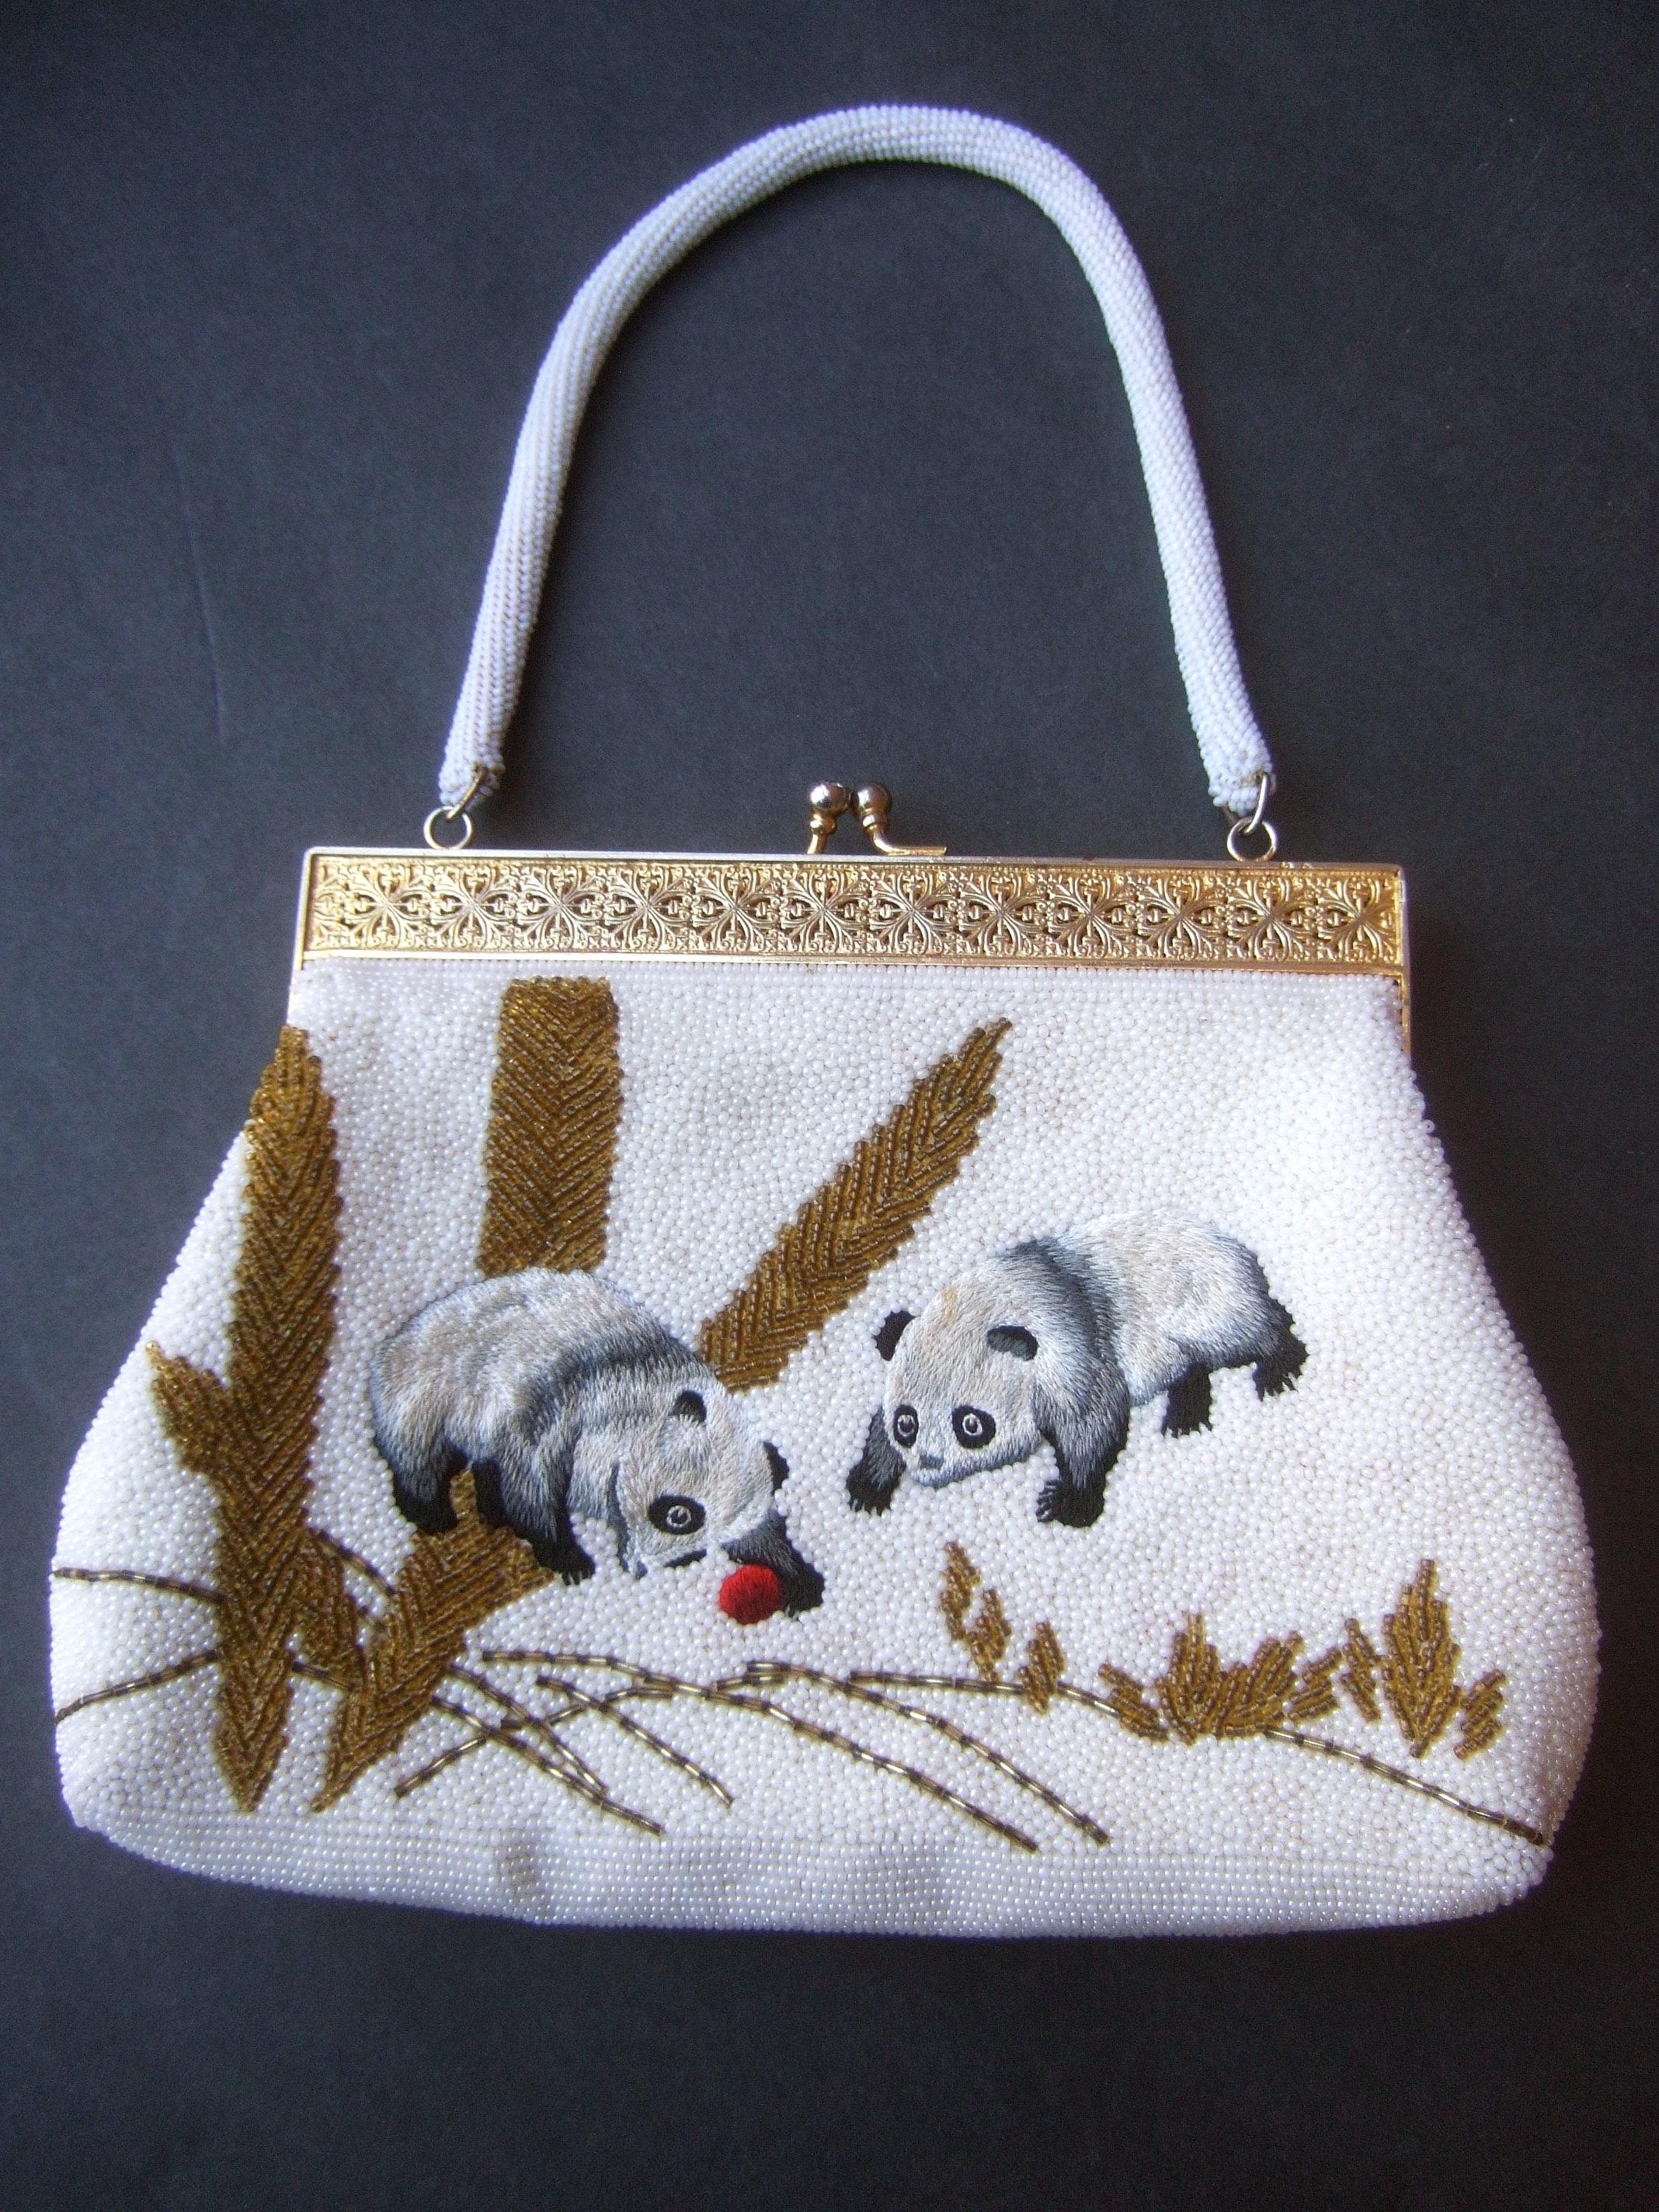 Charming glass hand-beaded embroidered panda evening purse c 1960s 
The artisan evening bag is encrusted with intricate rows of tiny white glass beads
that emulate snow

Designed with a pair of endearing hand-embroidered panda bears set against the